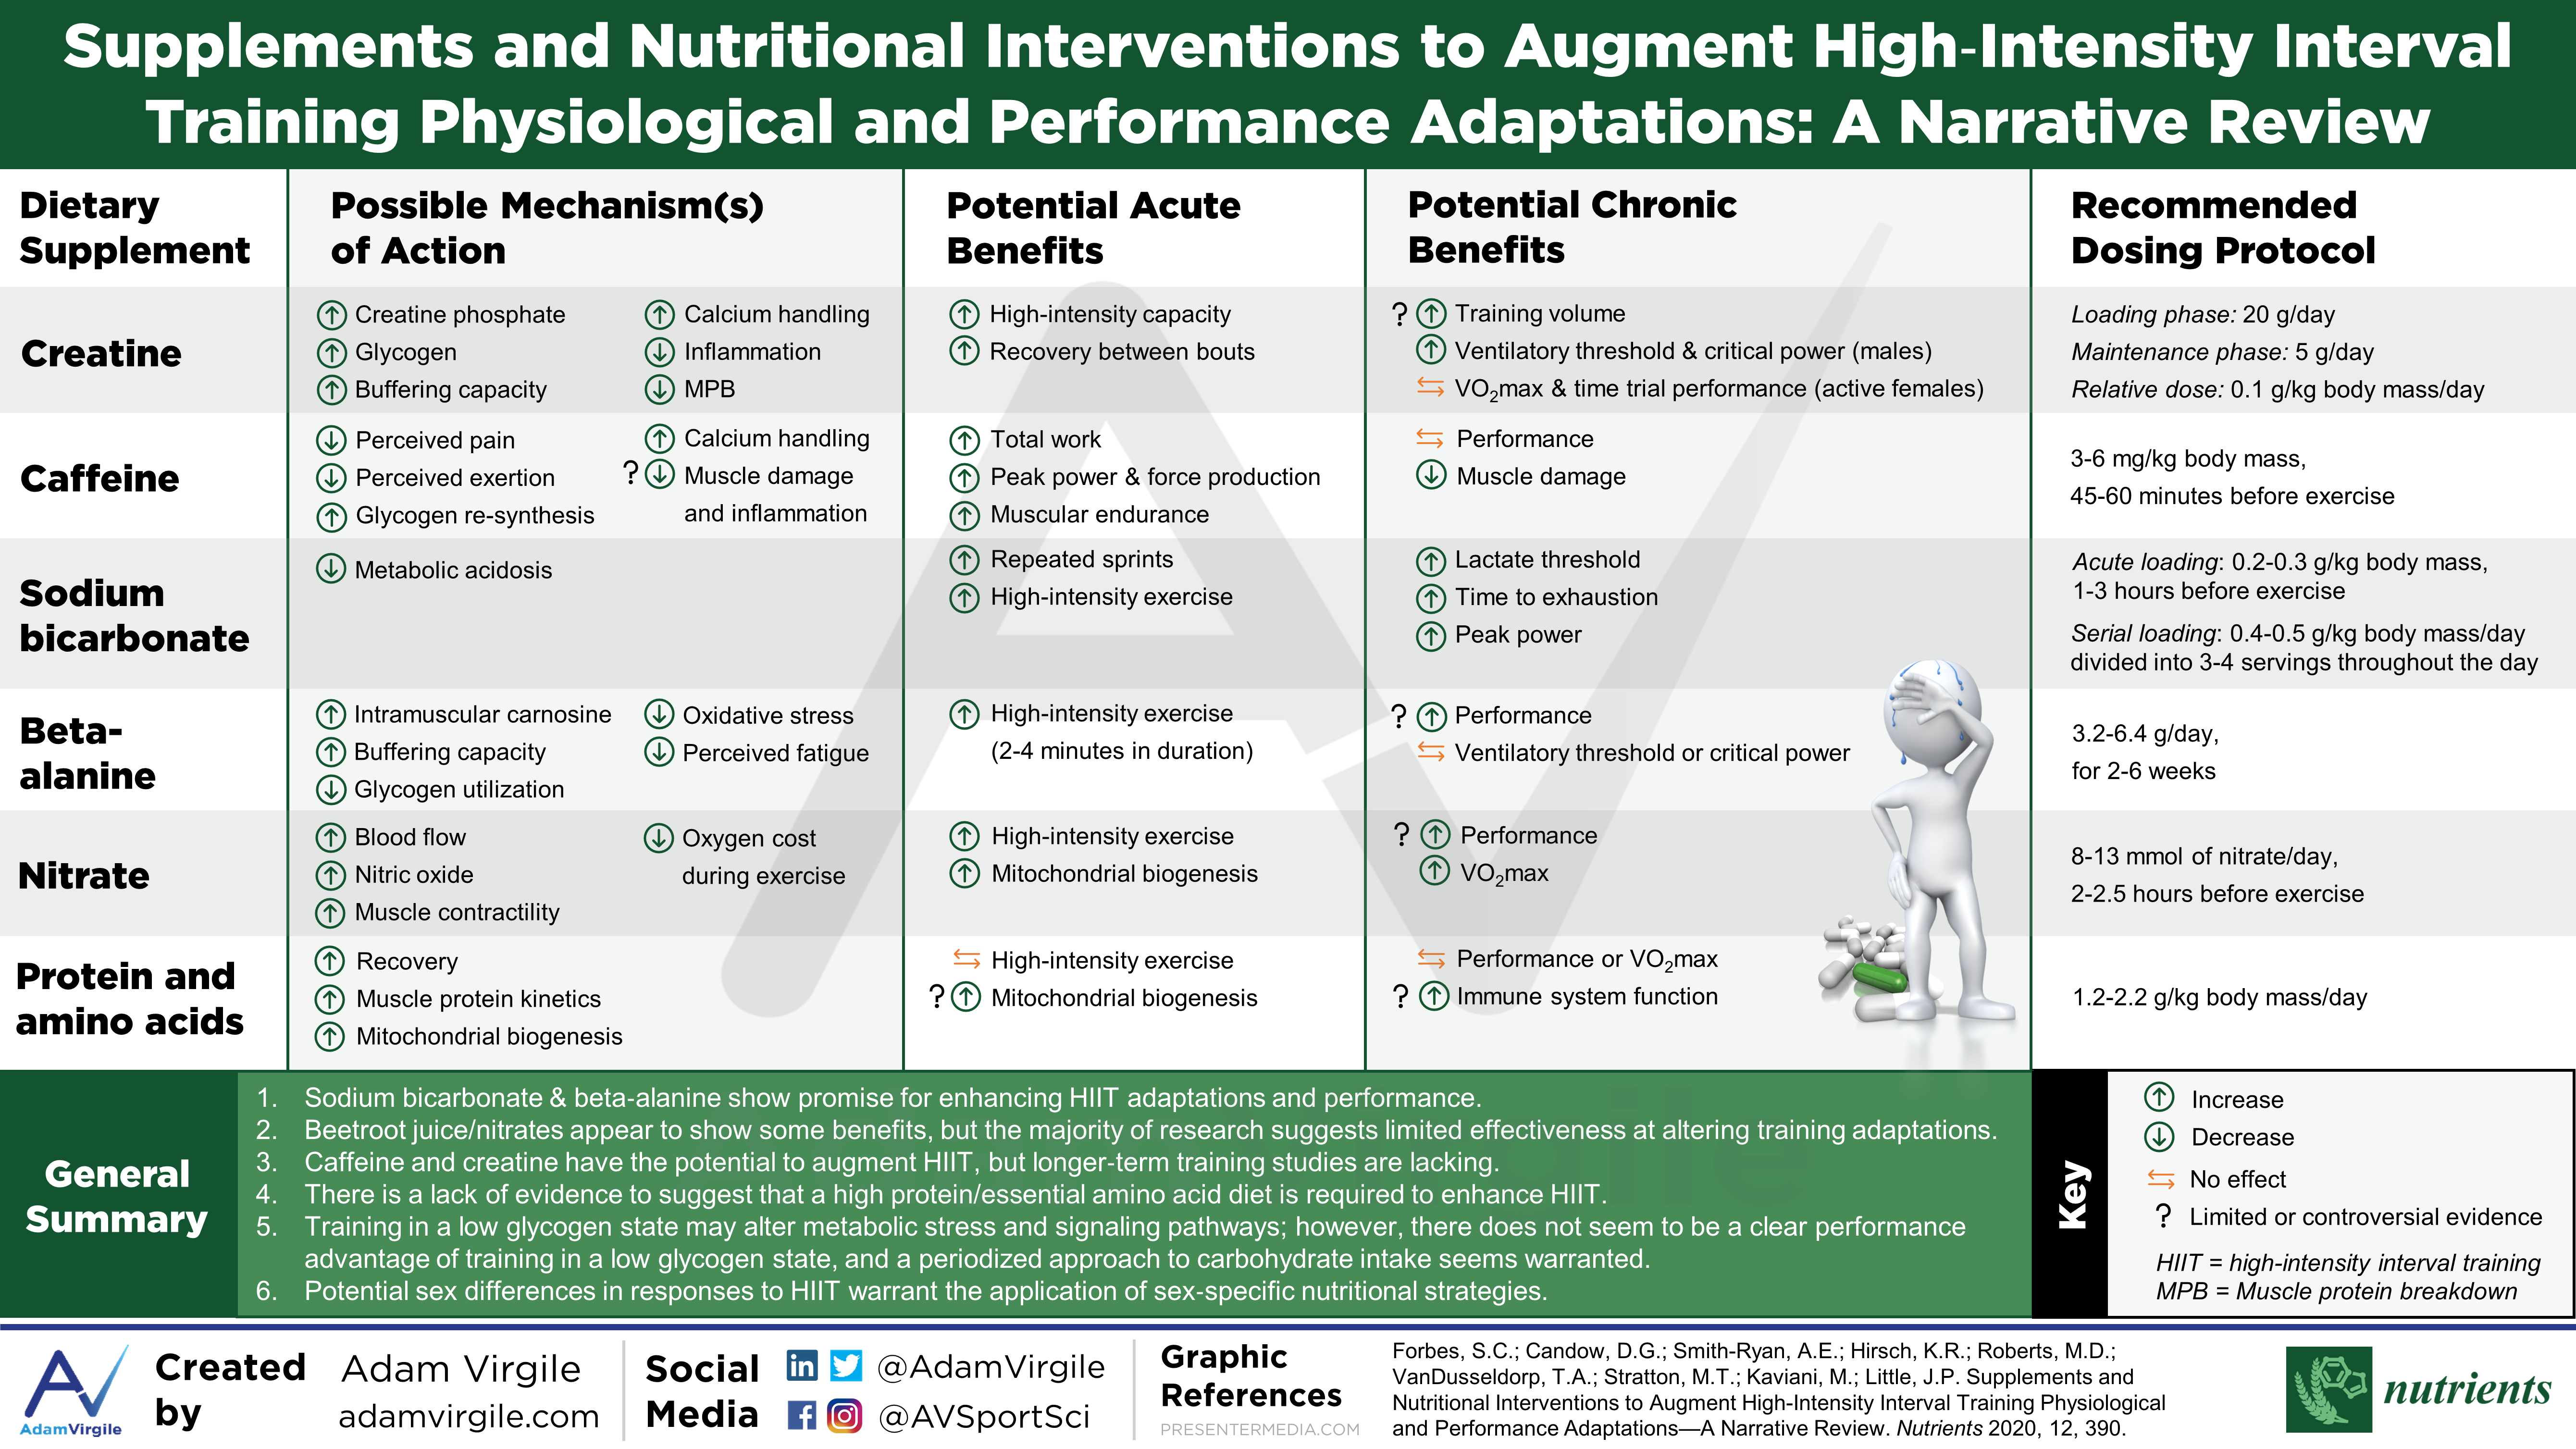 You are currently viewing Supplements and Nutritional Interventions to Augment High-Intensity Interval Training Physiological and Performance Adaptations: A Narrative Review